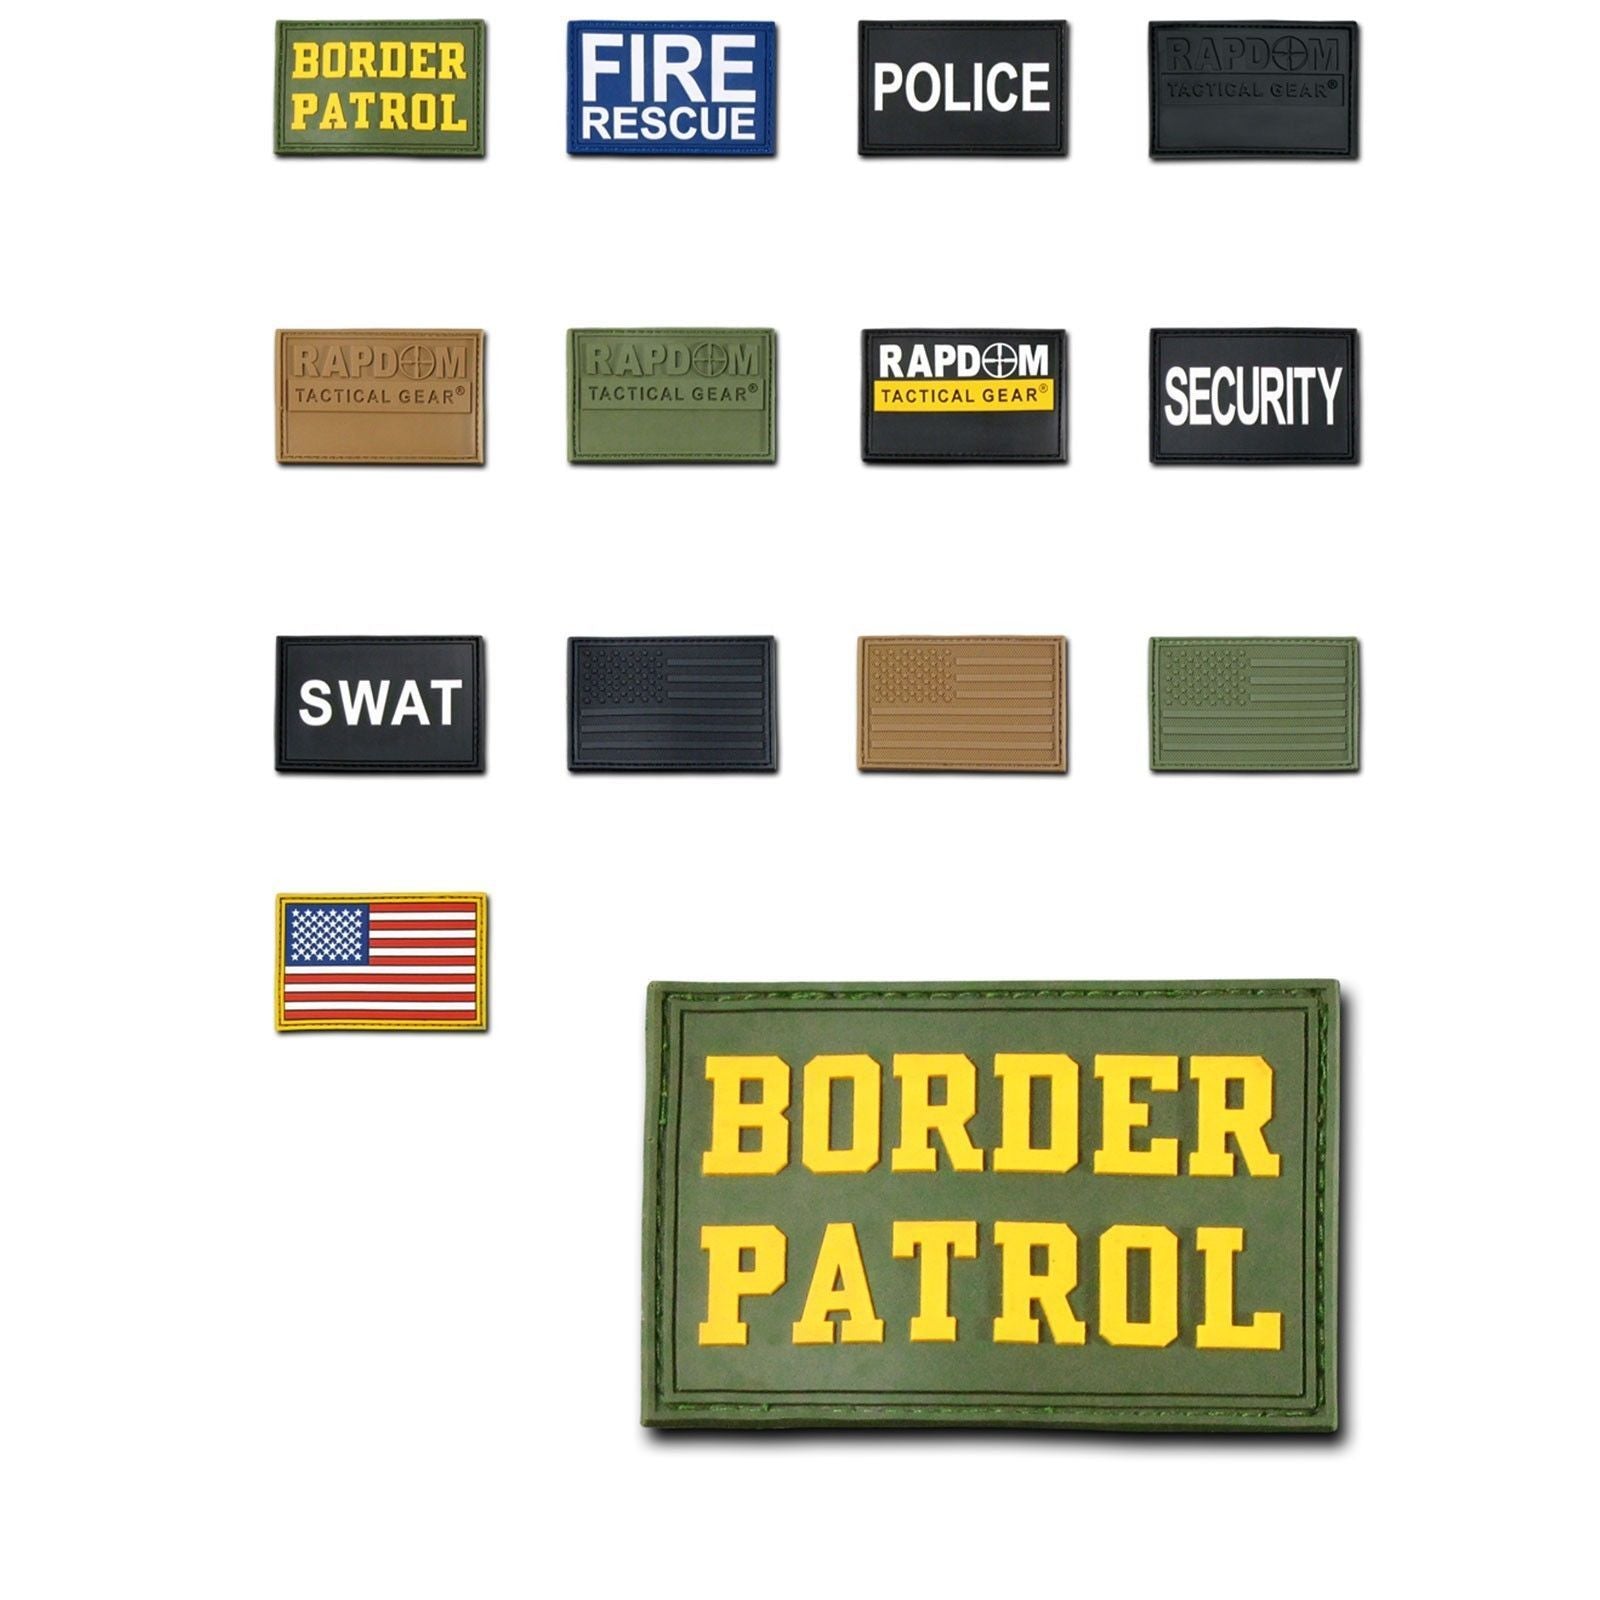 T90 - Tactical Patch - USA Flag - Rubber (3x2) - Subdued Black